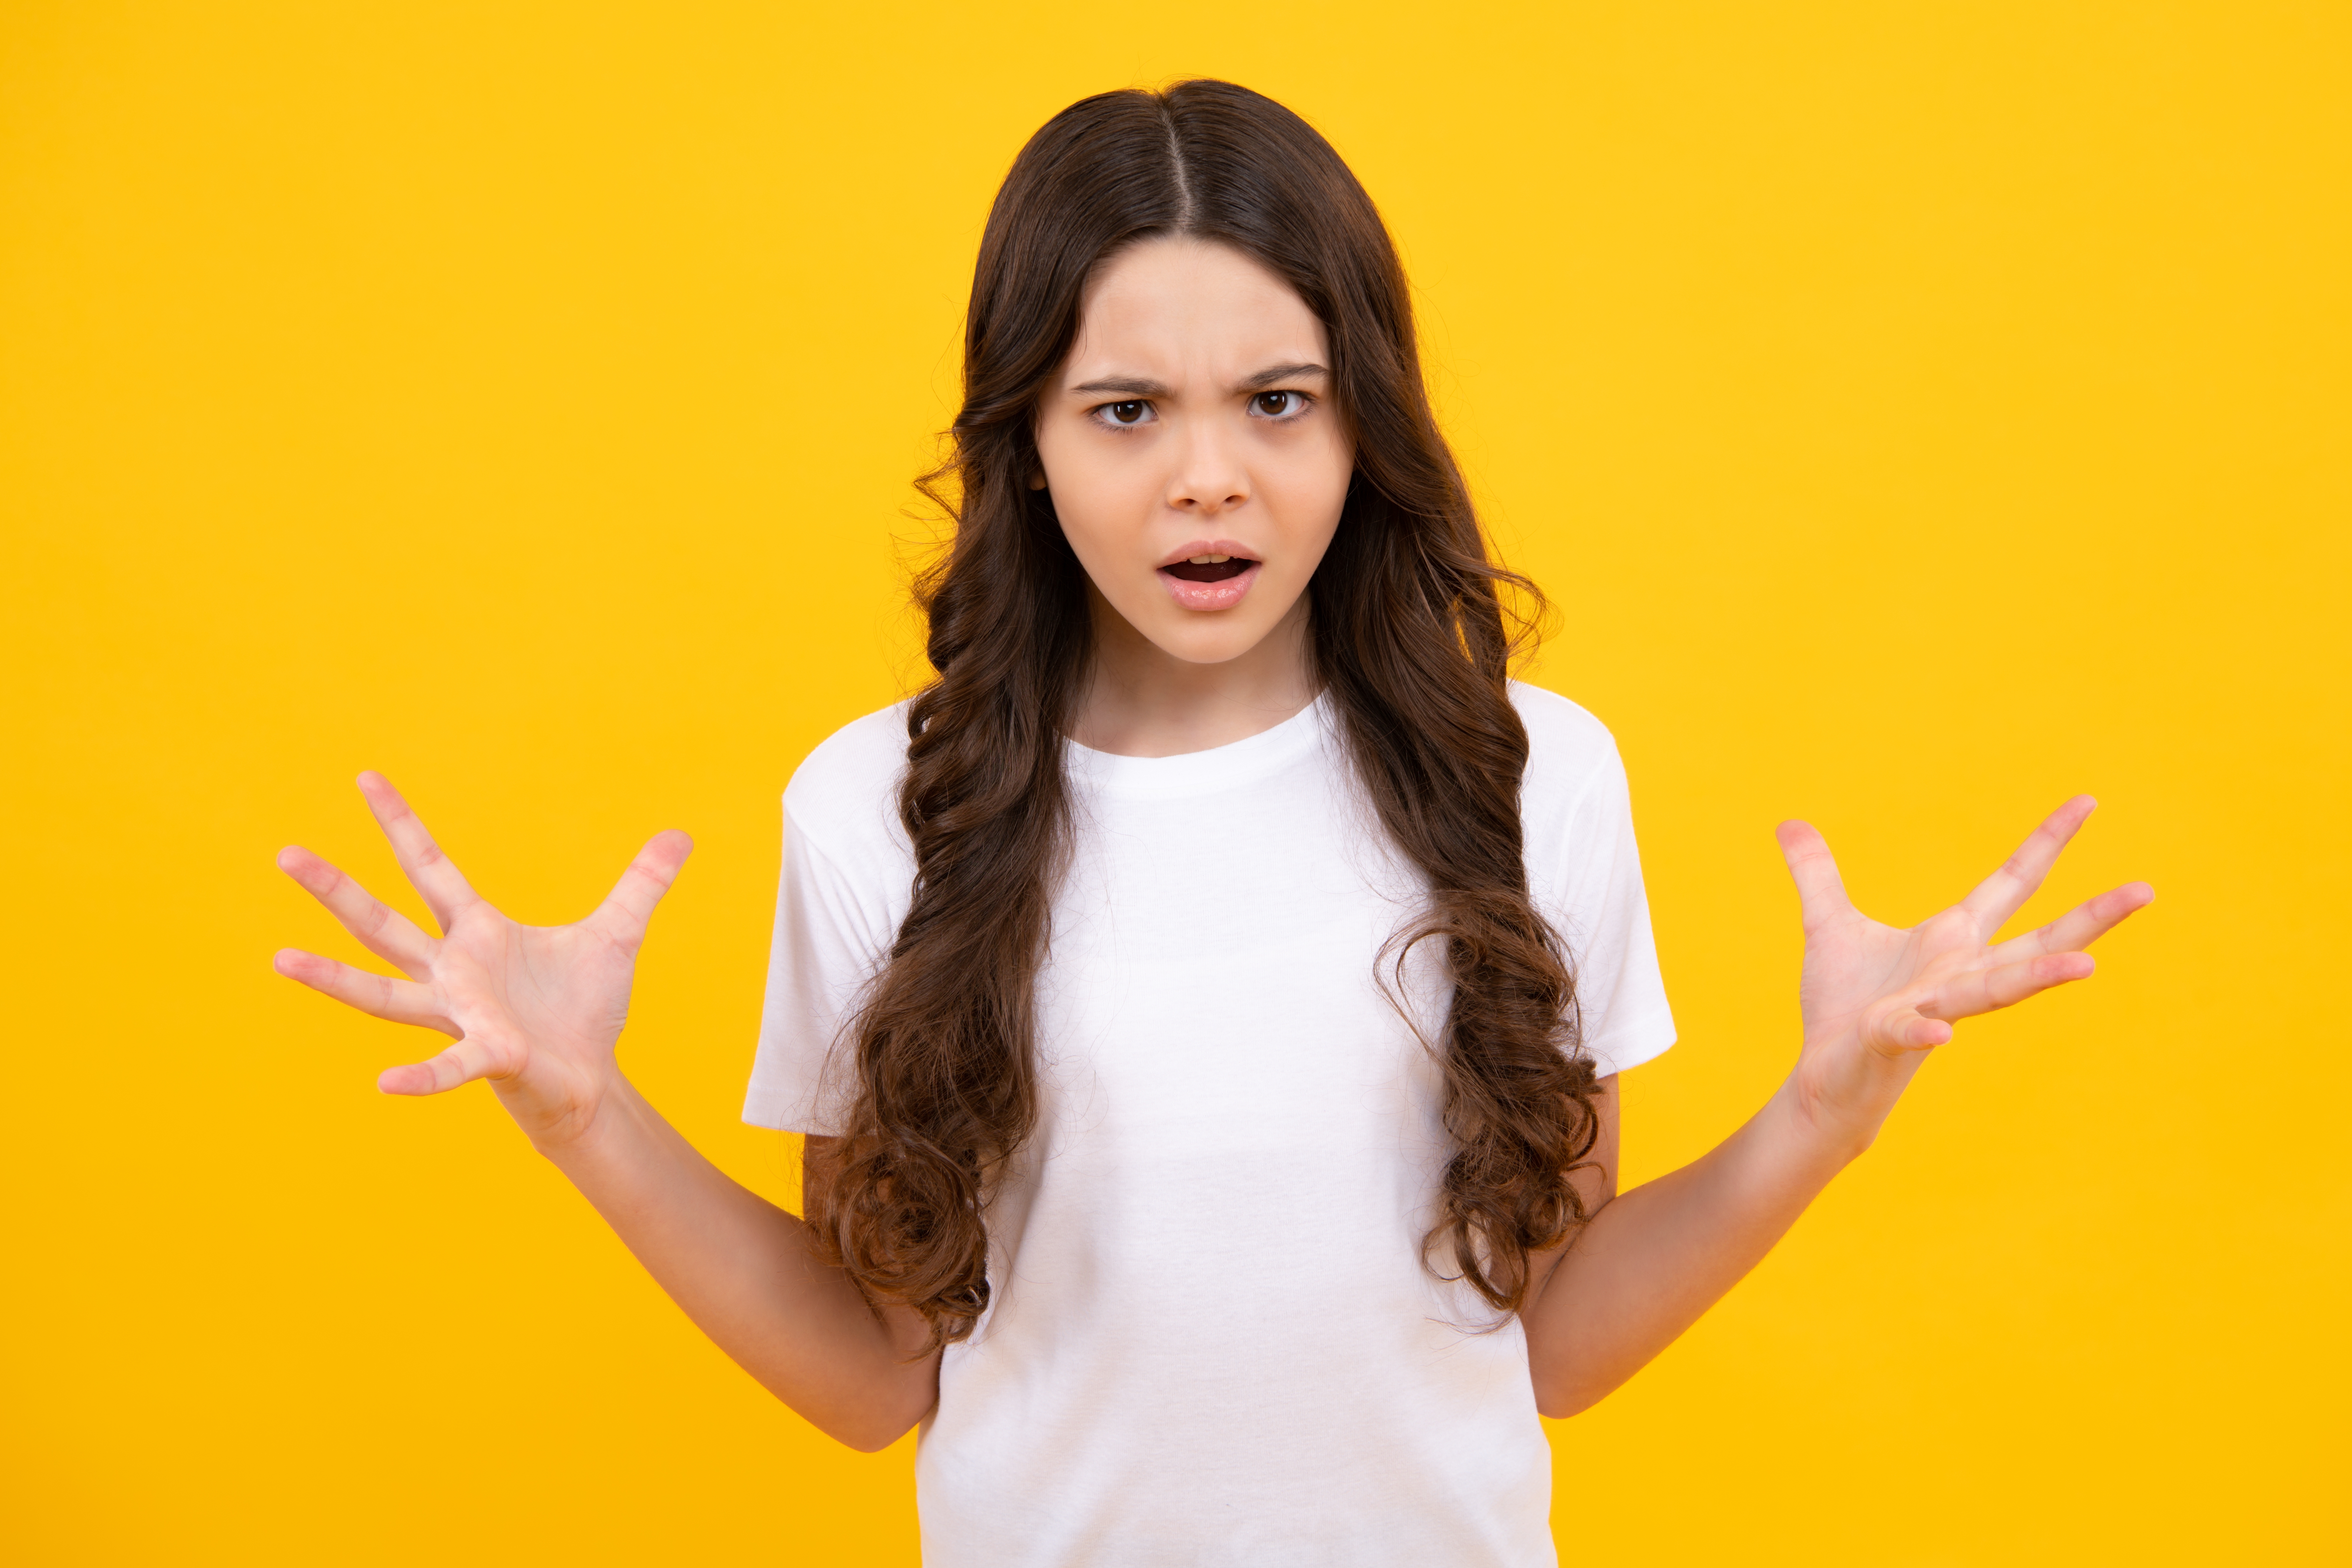 Teenage girl looking shocked and angry | Source: Shutterstock